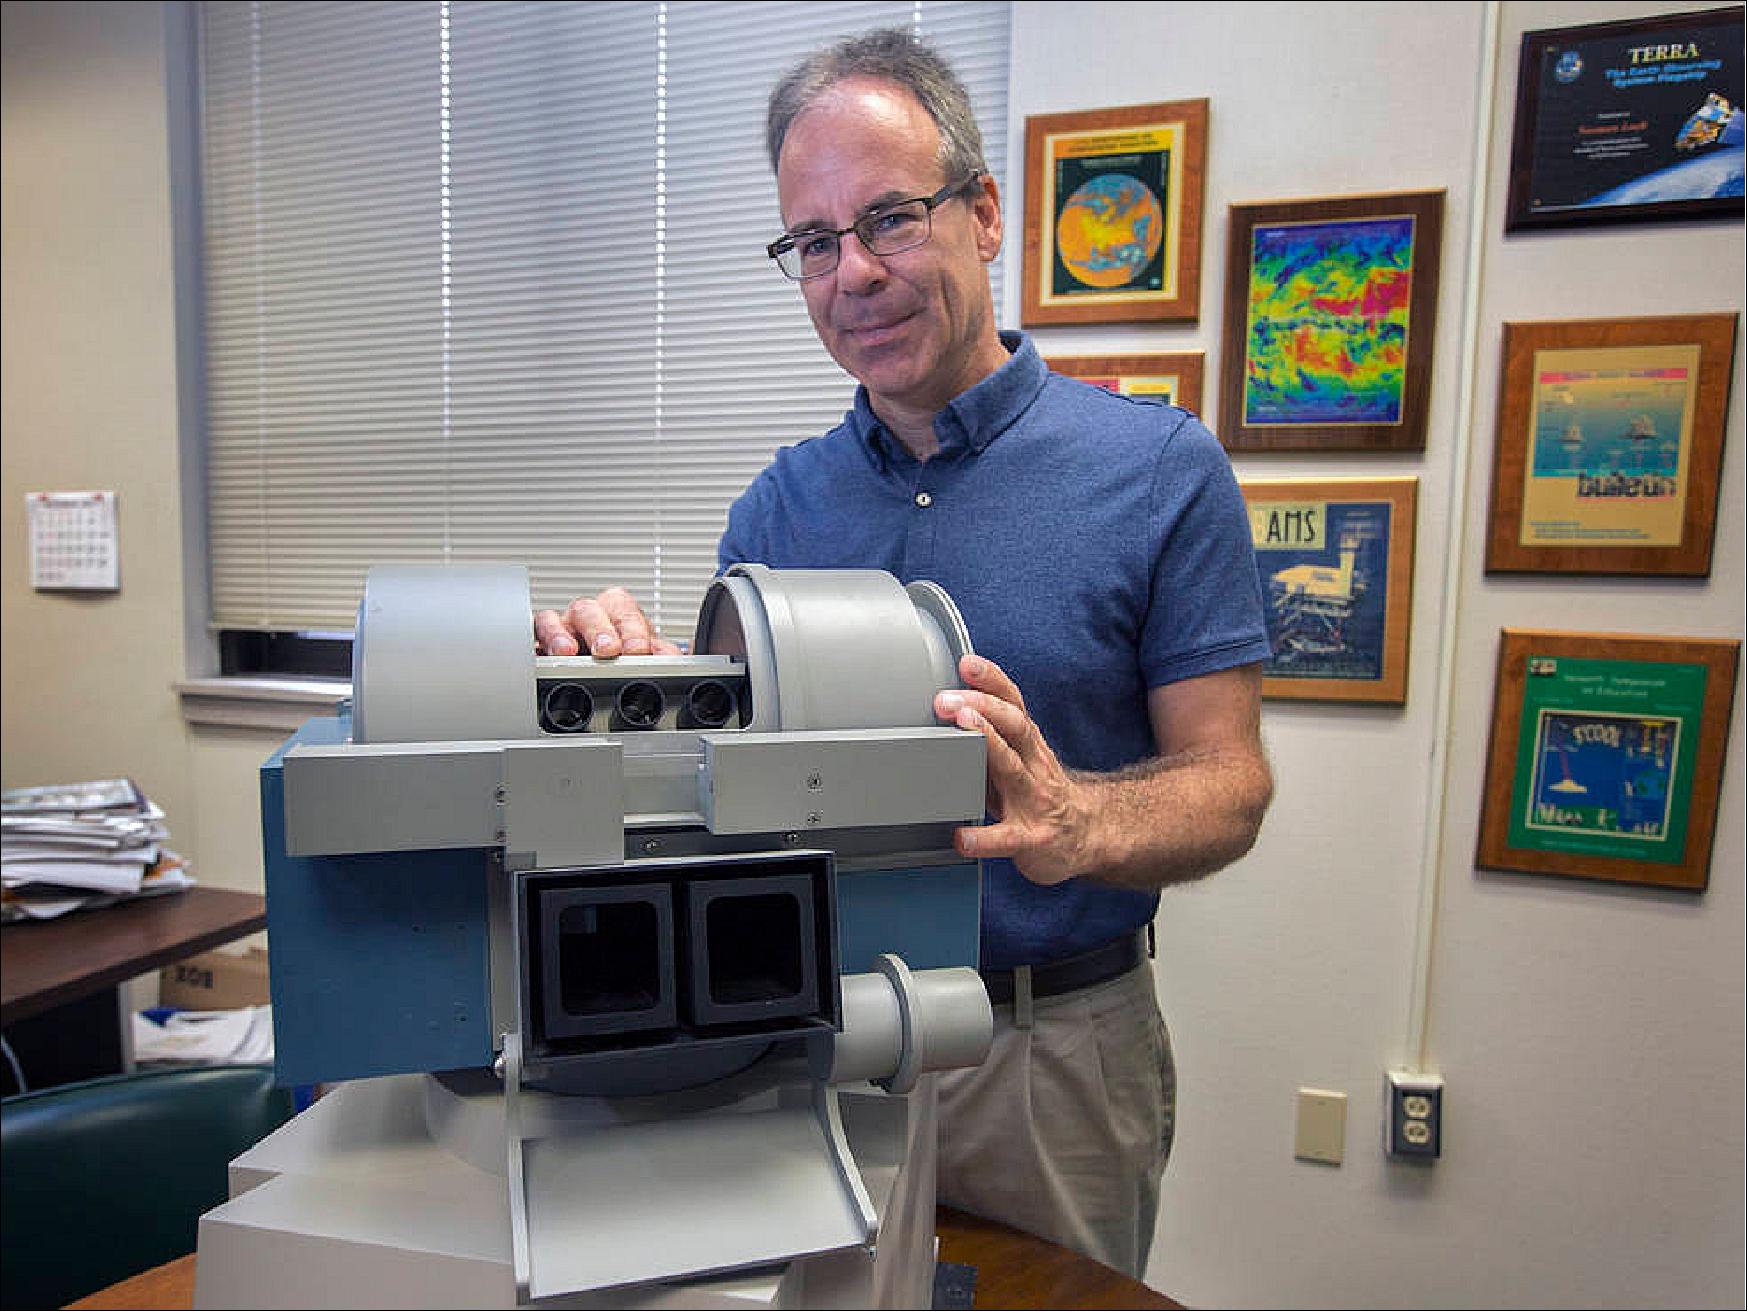 Figure 59: Norman Loeb, principal investigator of NASA’s Radiation Budget Science Project, is pictured with a CERES model, which studies the clouds and monitor Earth's “energy budget” (image credit: NASA, David C. Bowman) 97)